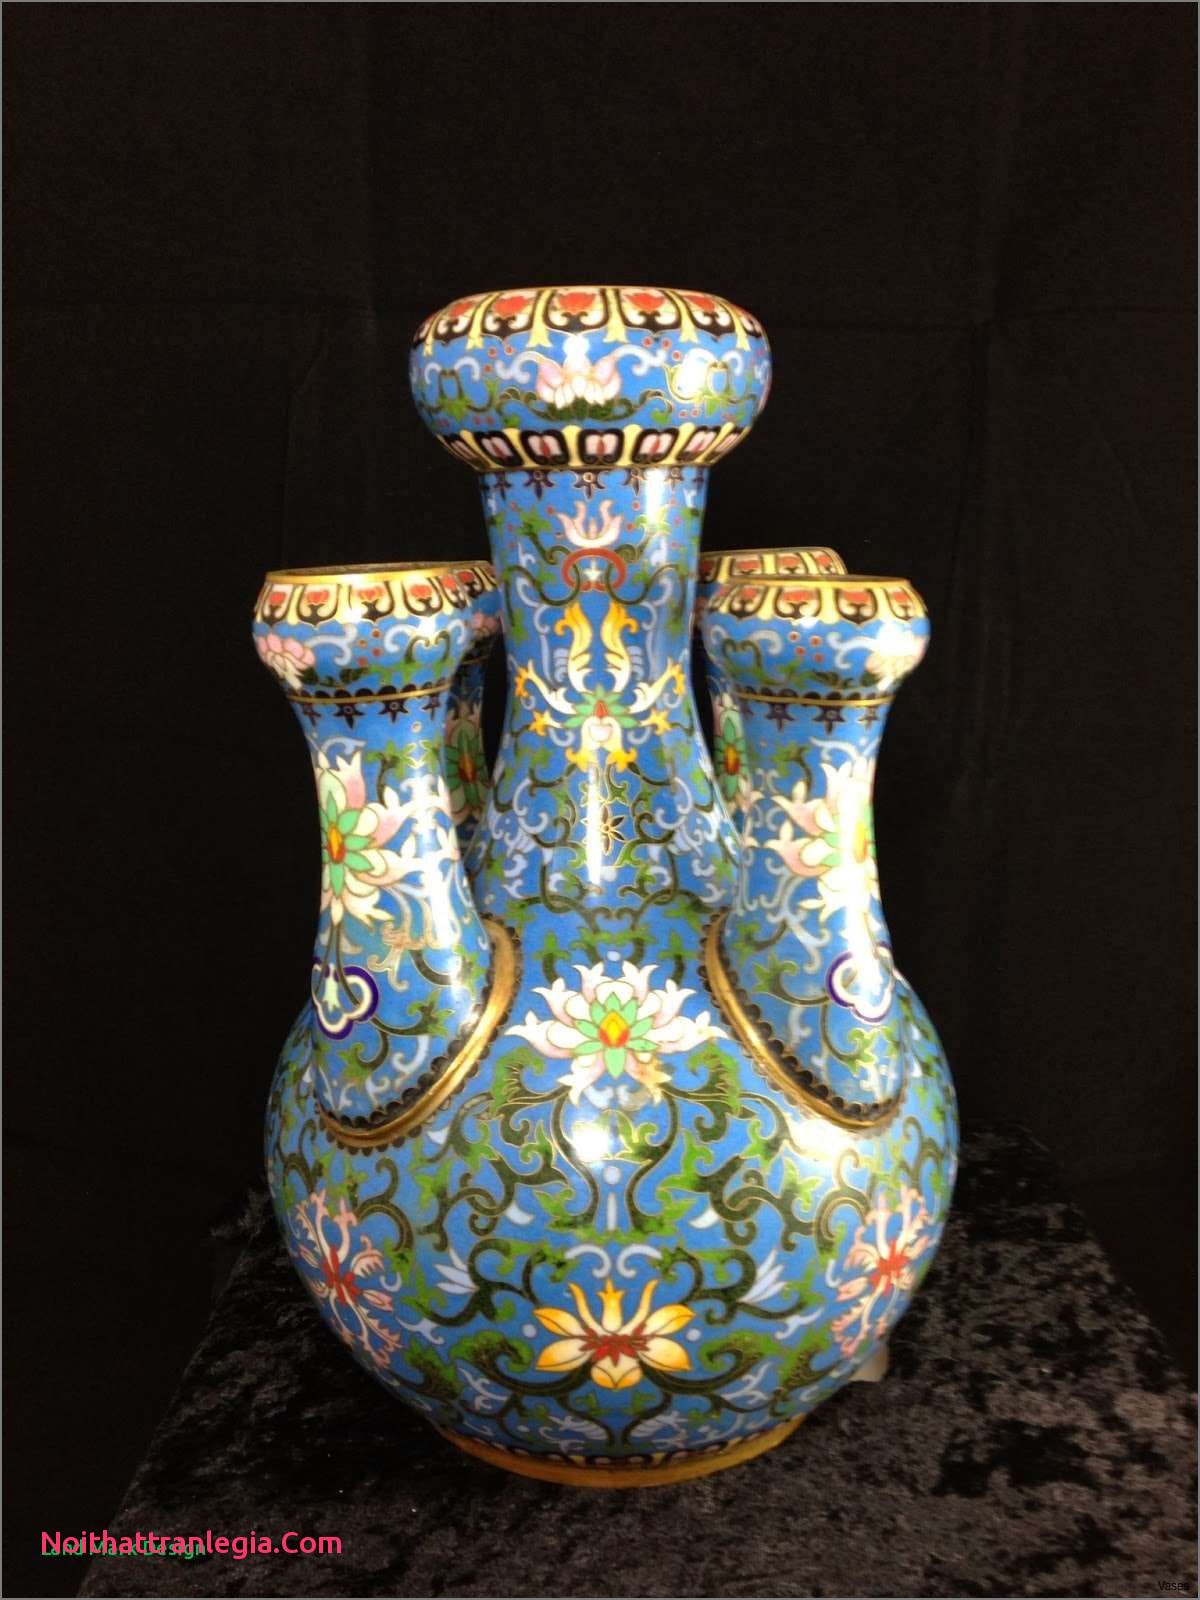 20 attractive Antique Chinese Vases 2024 free download antique chinese vases of 20 chinese antique vase noithattranlegia vases design for 213 1h vases antique asian the increased trade of chinese ware during 16th century has significantly